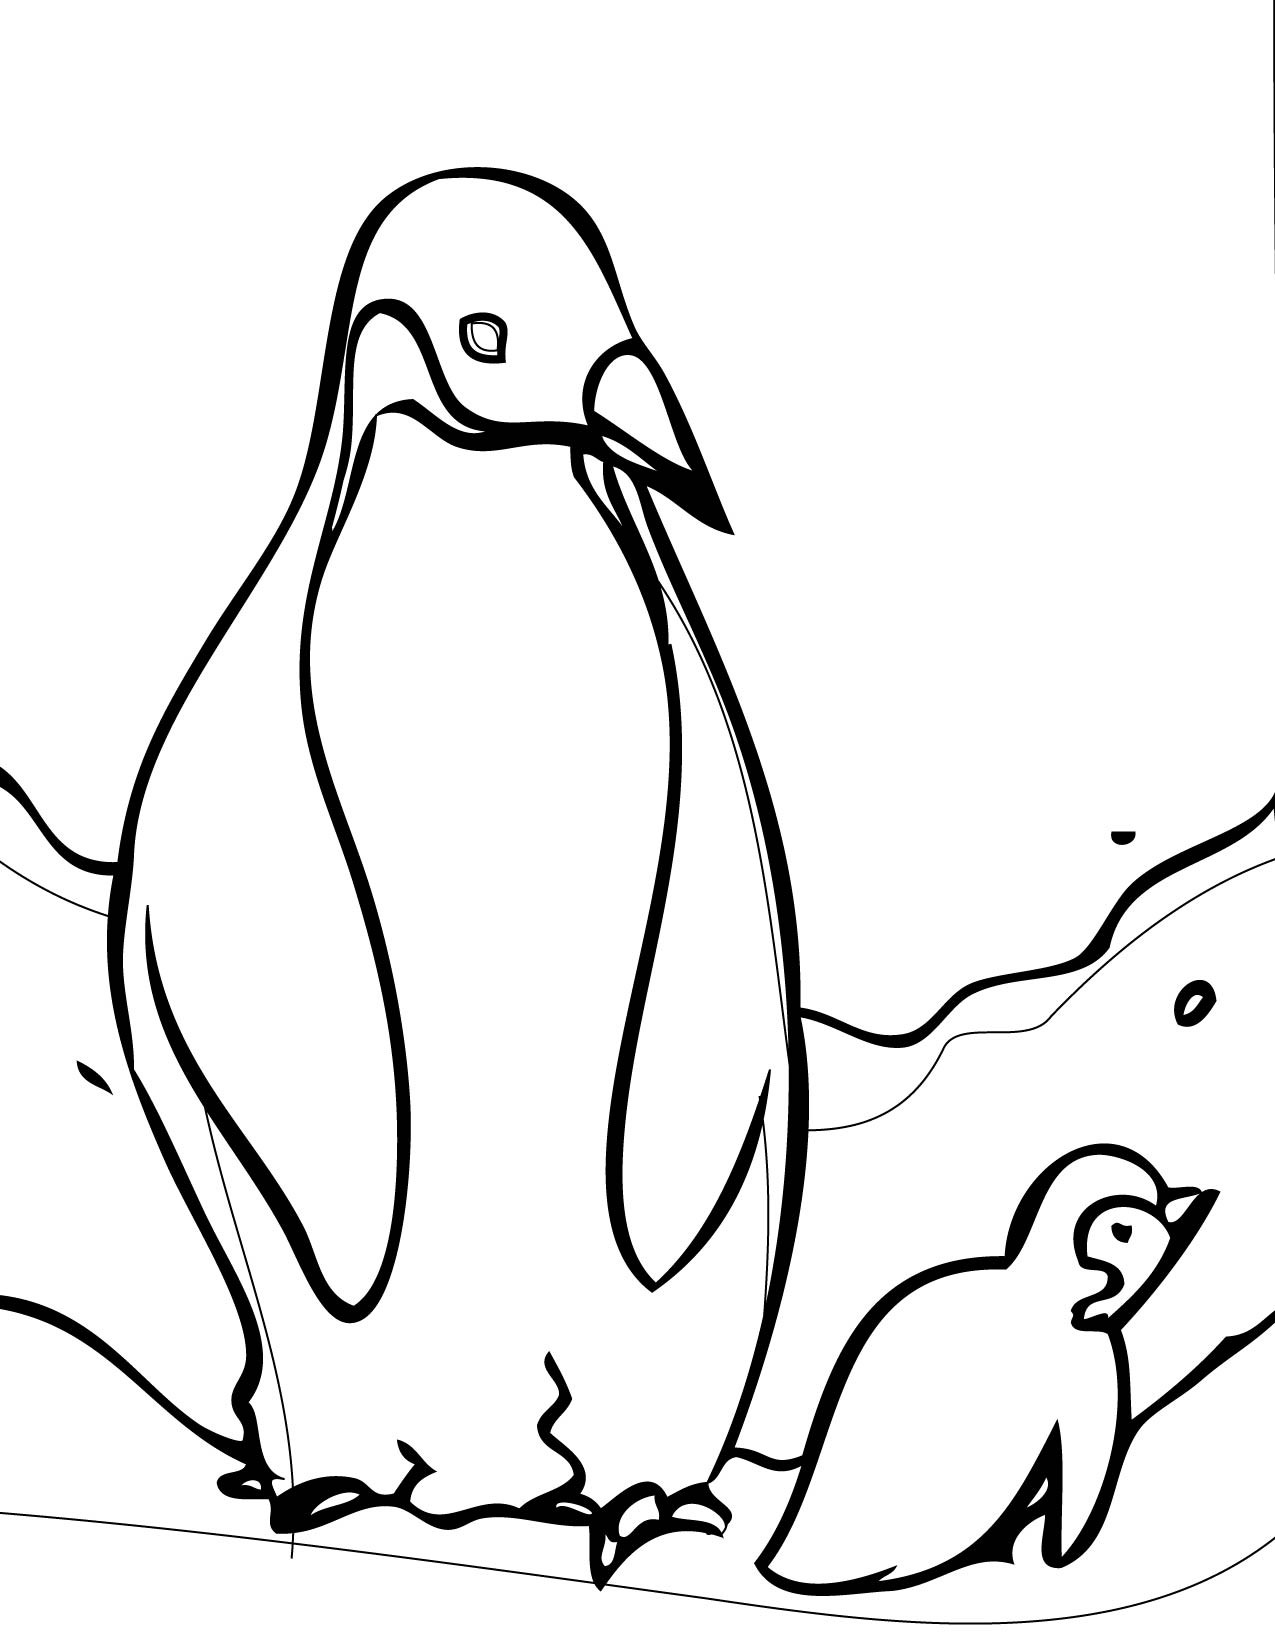 Coloring pages coloring book penguin pages pdf printable free worksheets for kids format